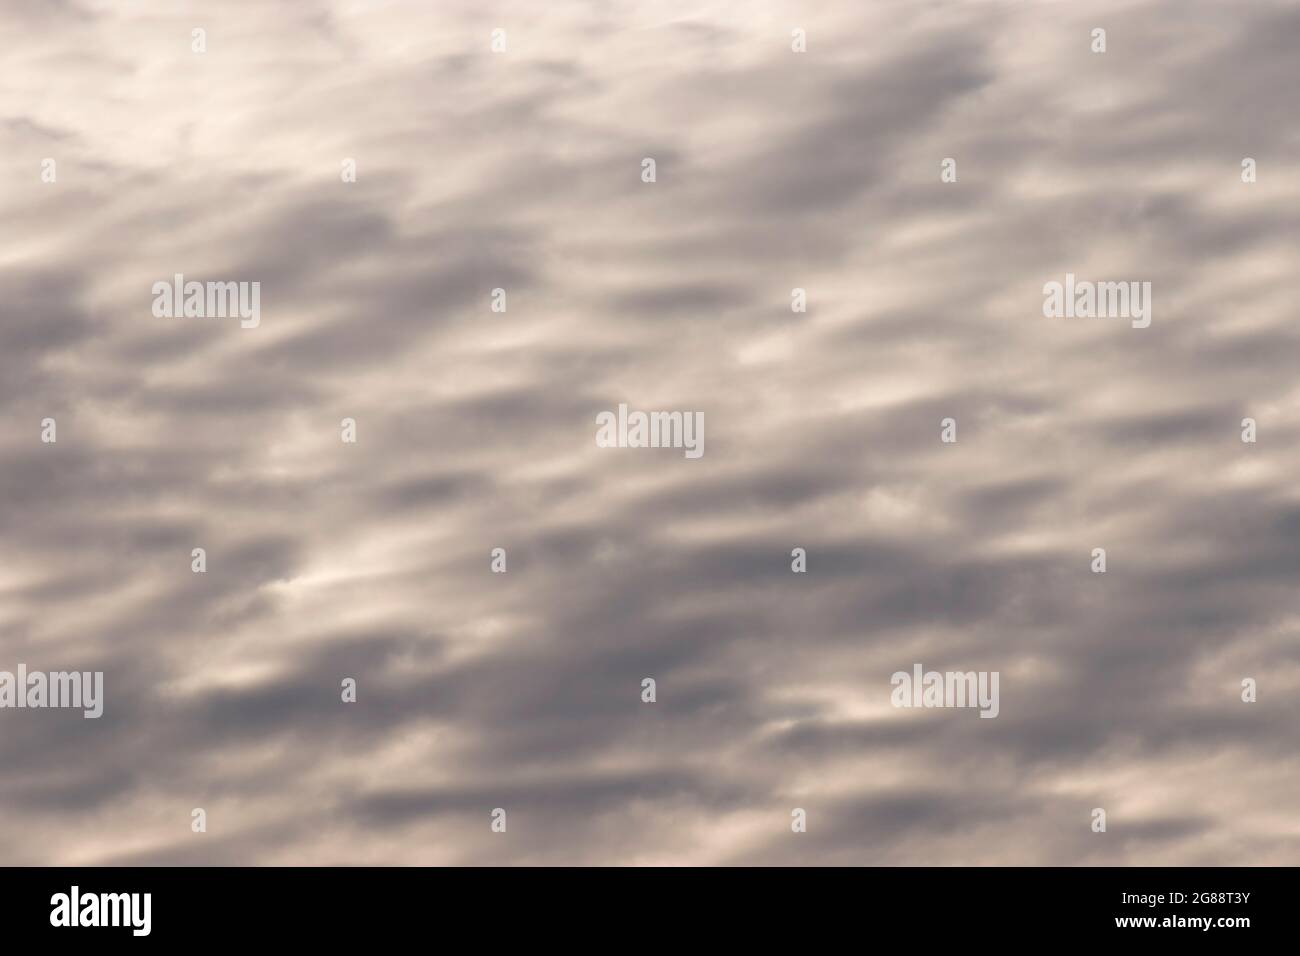 Grey and white stratocumulus cloud layer with a regular woven pattern appearance. Low level clouds, winter,  Australia. Background, copy space. Stock Photo